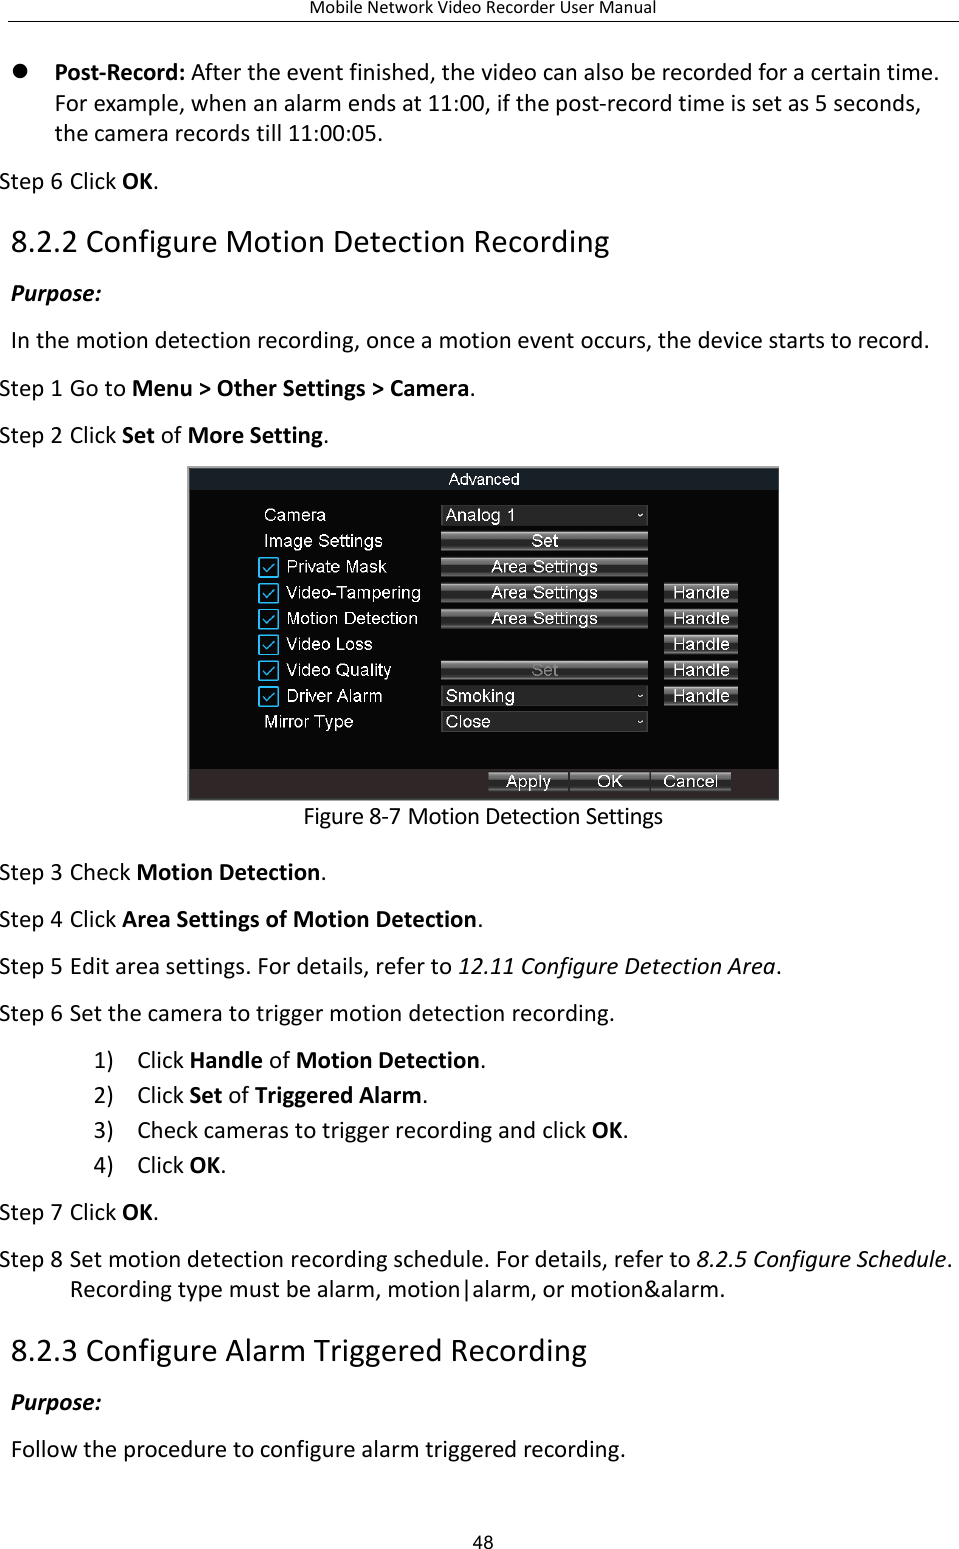 Mobile Network Video Recorder User Manual 48  Post-Record: After the event finished, the video can also be recorded for a certain time. For example, when an alarm ends at 11:00, if the post-record time is set as 5 seconds, the camera records till 11:00:05. Step 6 Click OK. 8.2.2 Configure Motion Detection Recording Purpose:   In the motion detection recording, once a motion event occurs, the device starts to record. Step 1 Go to Menu &gt; Other Settings &gt; Camera. Step 2 Click Set of More Setting.  Figure 8-7 Motion Detection Settings Step 3 Check Motion Detection. Step 4 Click Area Settings of Motion Detection. Step 5 Edit area settings. For details, refer to 12.11 Configure Detection Area. Step 6 Set the camera to trigger motion detection recording. 1) Click Handle of Motion Detection. 2) Click Set of Triggered Alarm. 3) Check cameras to trigger recording and click OK. 4) Click OK. Step 7 Click OK. Step 8 Set motion detection recording schedule. For details, refer to 8.2.5 Configure Schedule. Recording type must be alarm, motion|alarm, or motion&amp;alarm. 8.2.3 Configure Alarm Triggered Recording Purpose:   Follow the procedure to configure alarm triggered recording. 